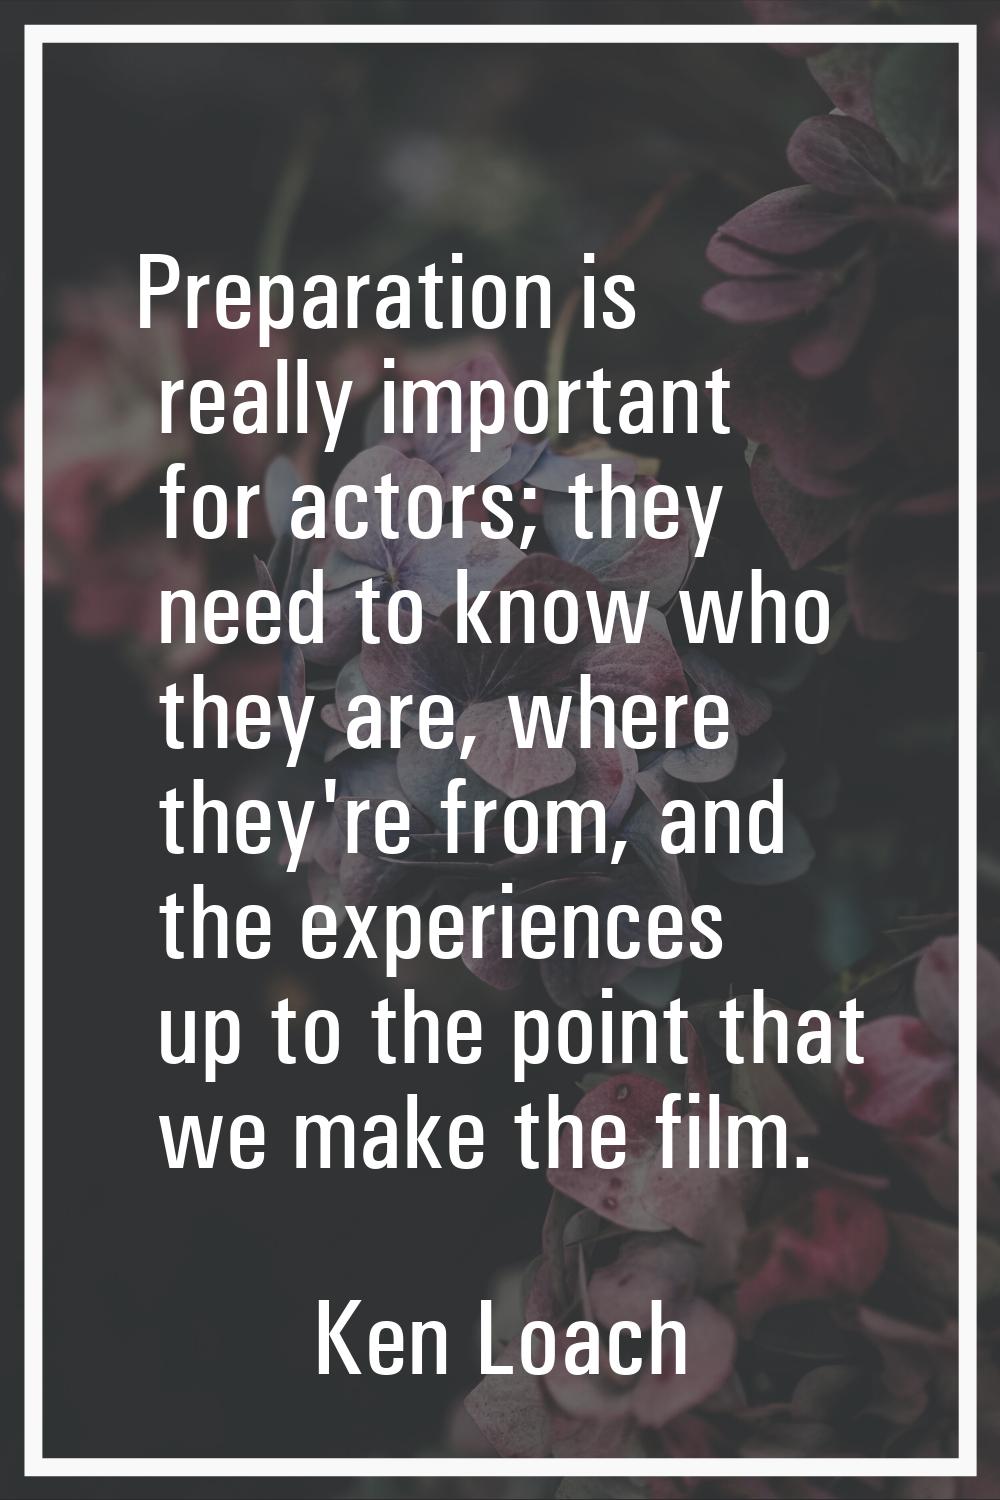 Preparation is really important for actors; they need to know who they are, where they're from, and